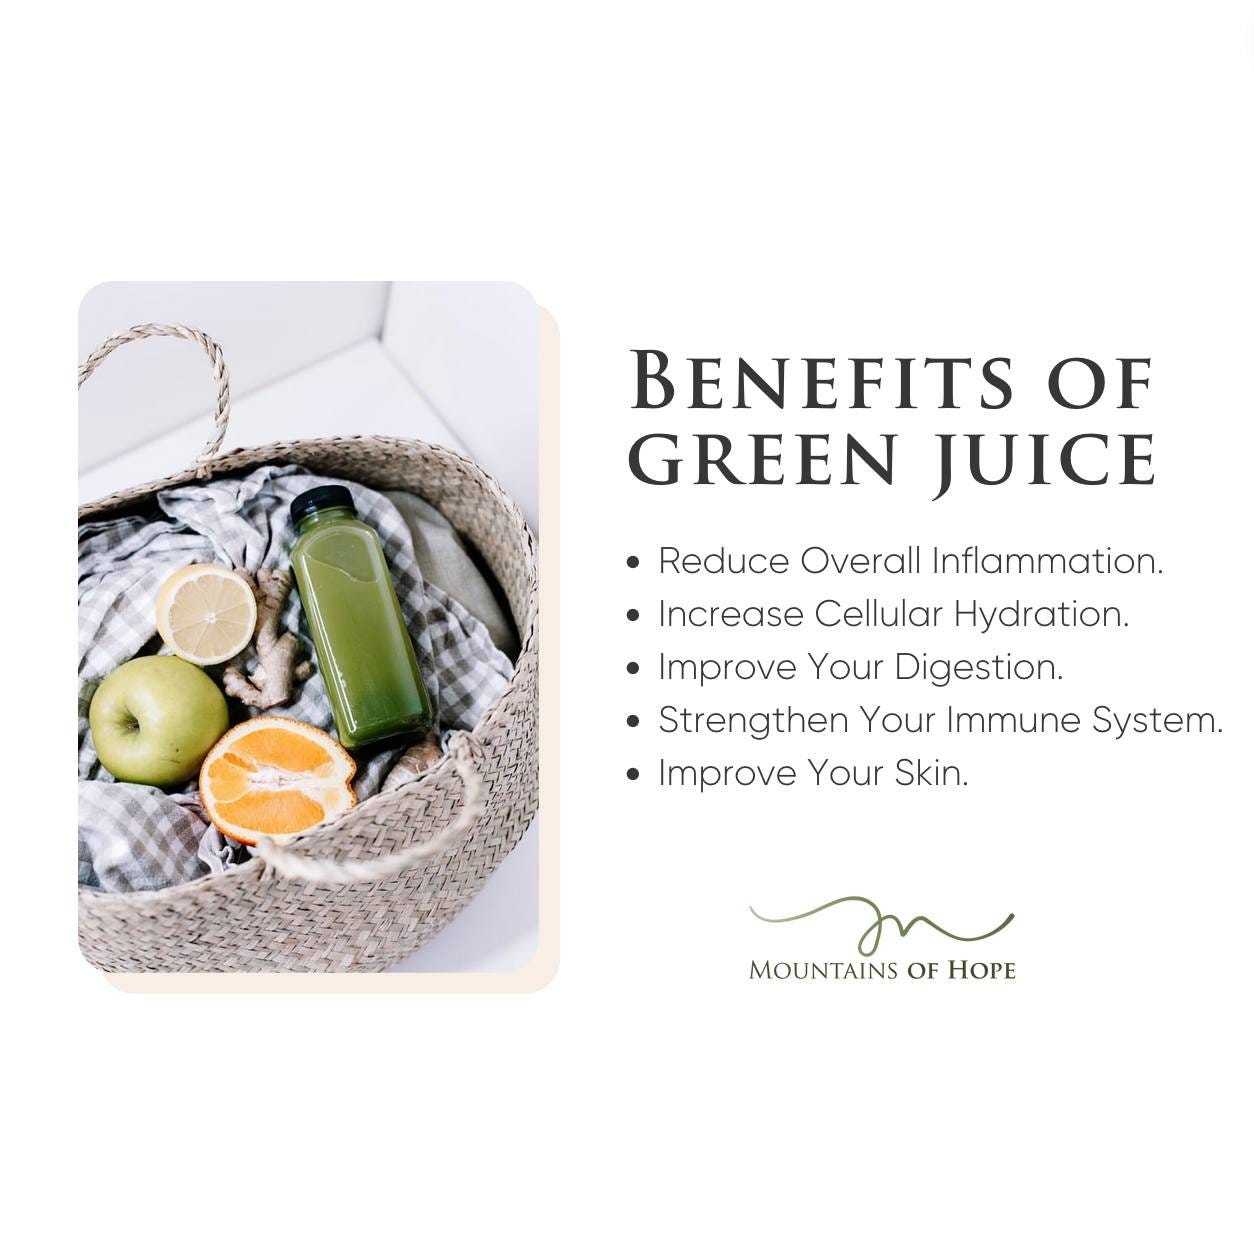 May be an image of algae, fruit and text that says 'BENEFITS OF GREEN JUICE Reduce Overall Inflammation. Increase Cellular Hydration. •Improve Your Digestion. Strengthen Your Immune System. Improve Your Skin. MOUNTAINS OF HOPE'